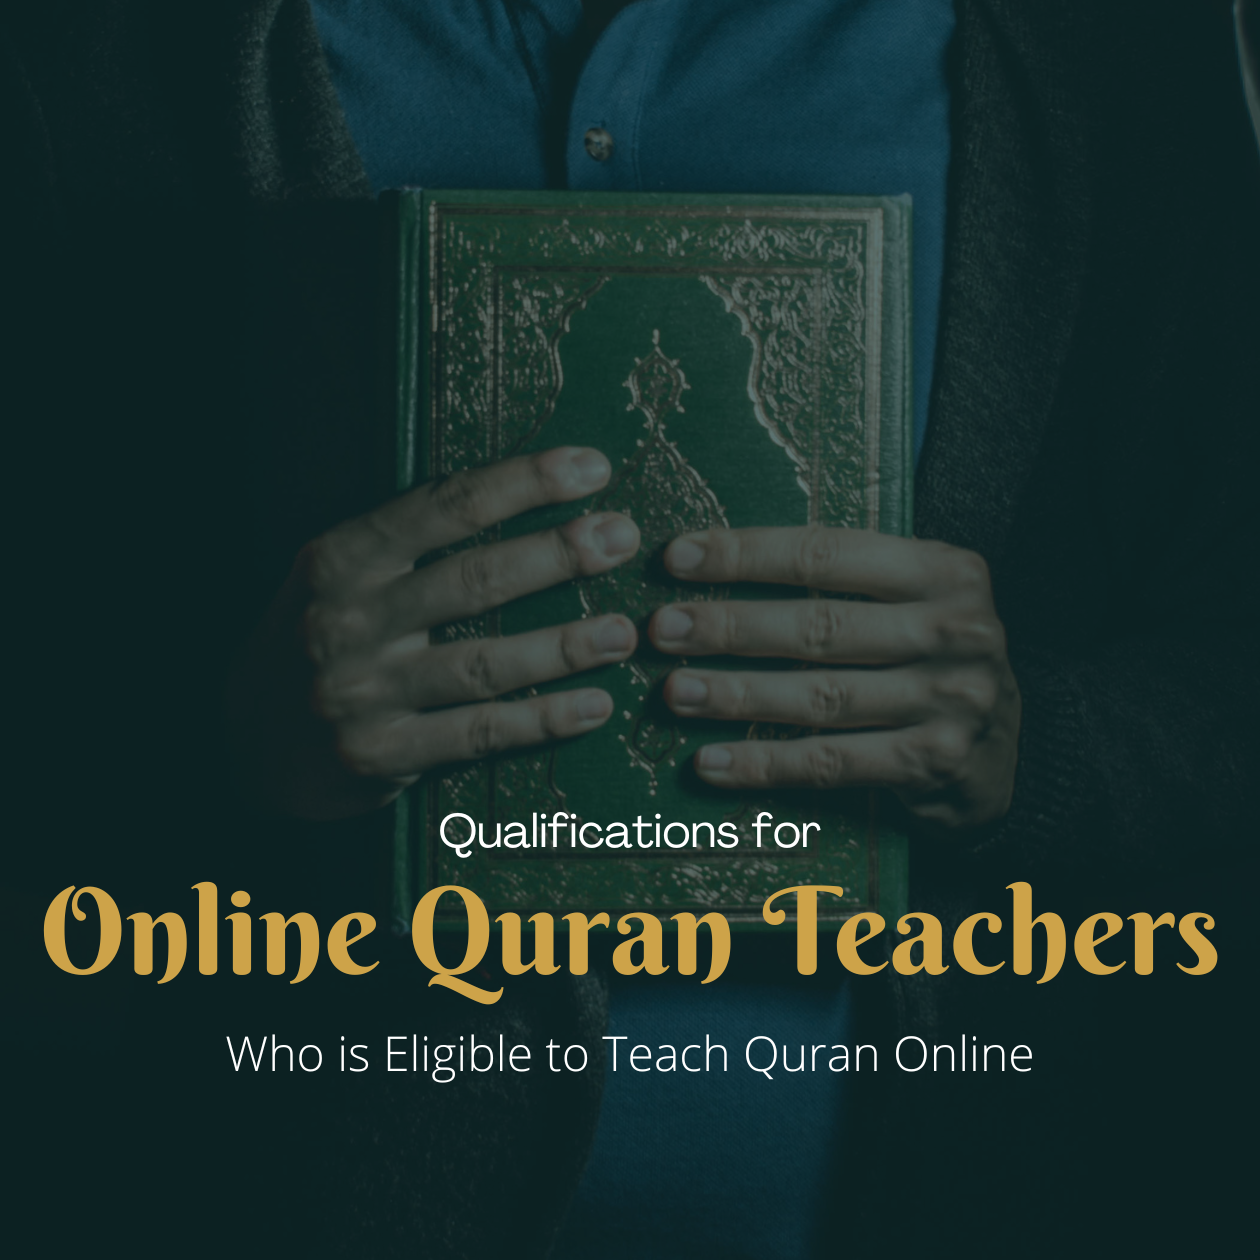 Qualifications for Online Quran Teachers: Who is Eligible to Teach Quran Online - Islamic Online Madrasha Bangladesh (IOMBD)